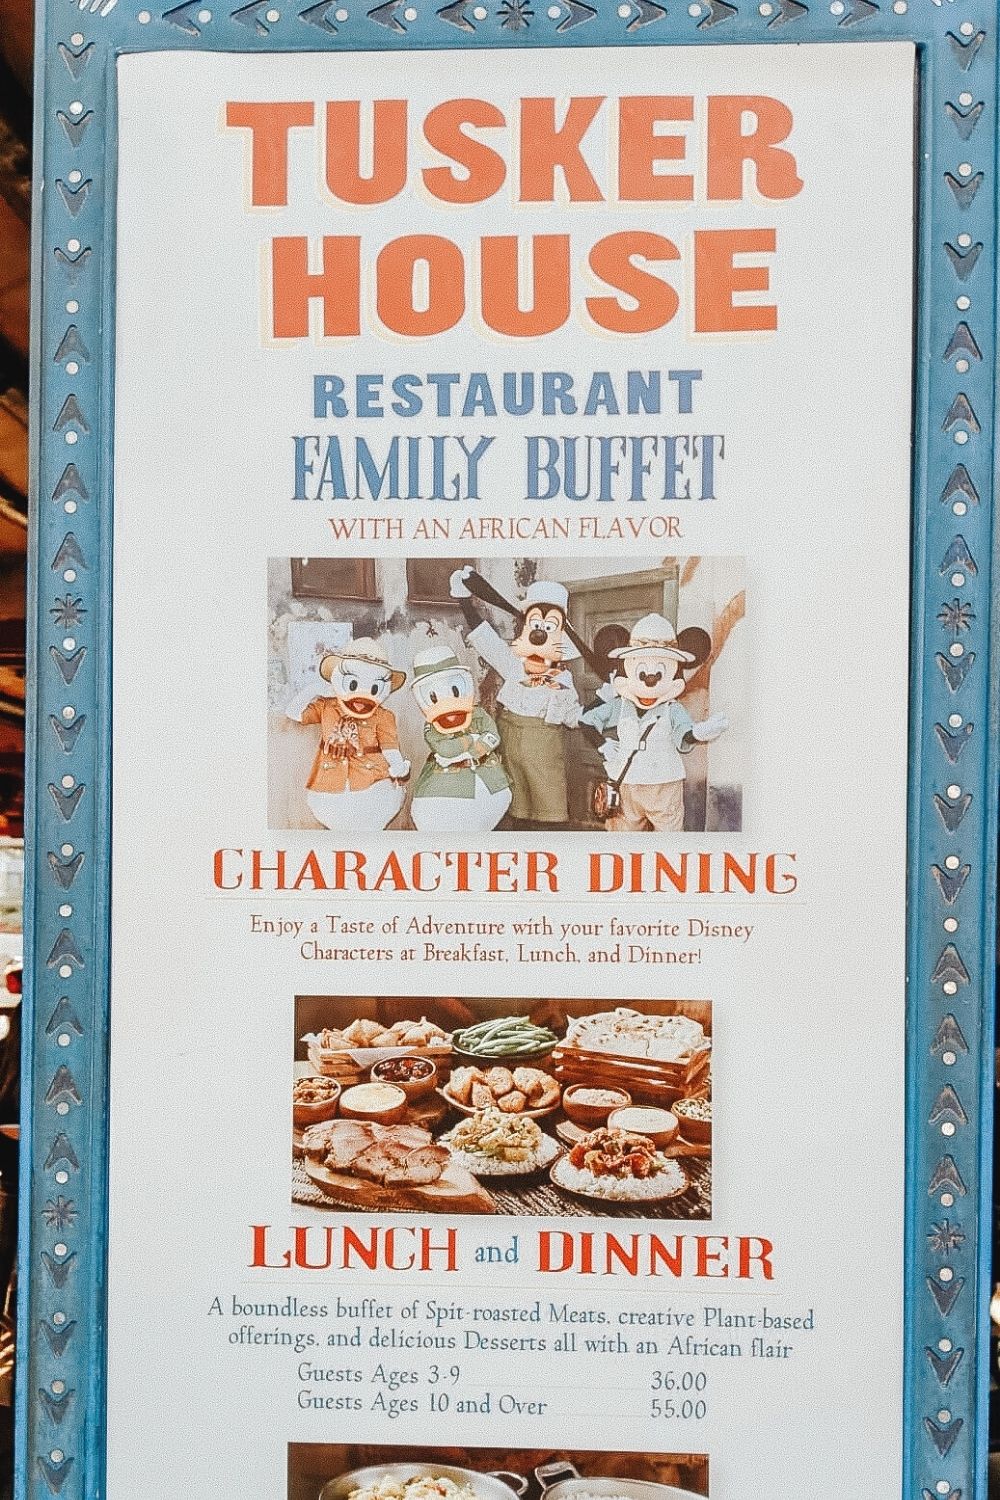 menu from Tusker House at Animal Kingdom in Disney World